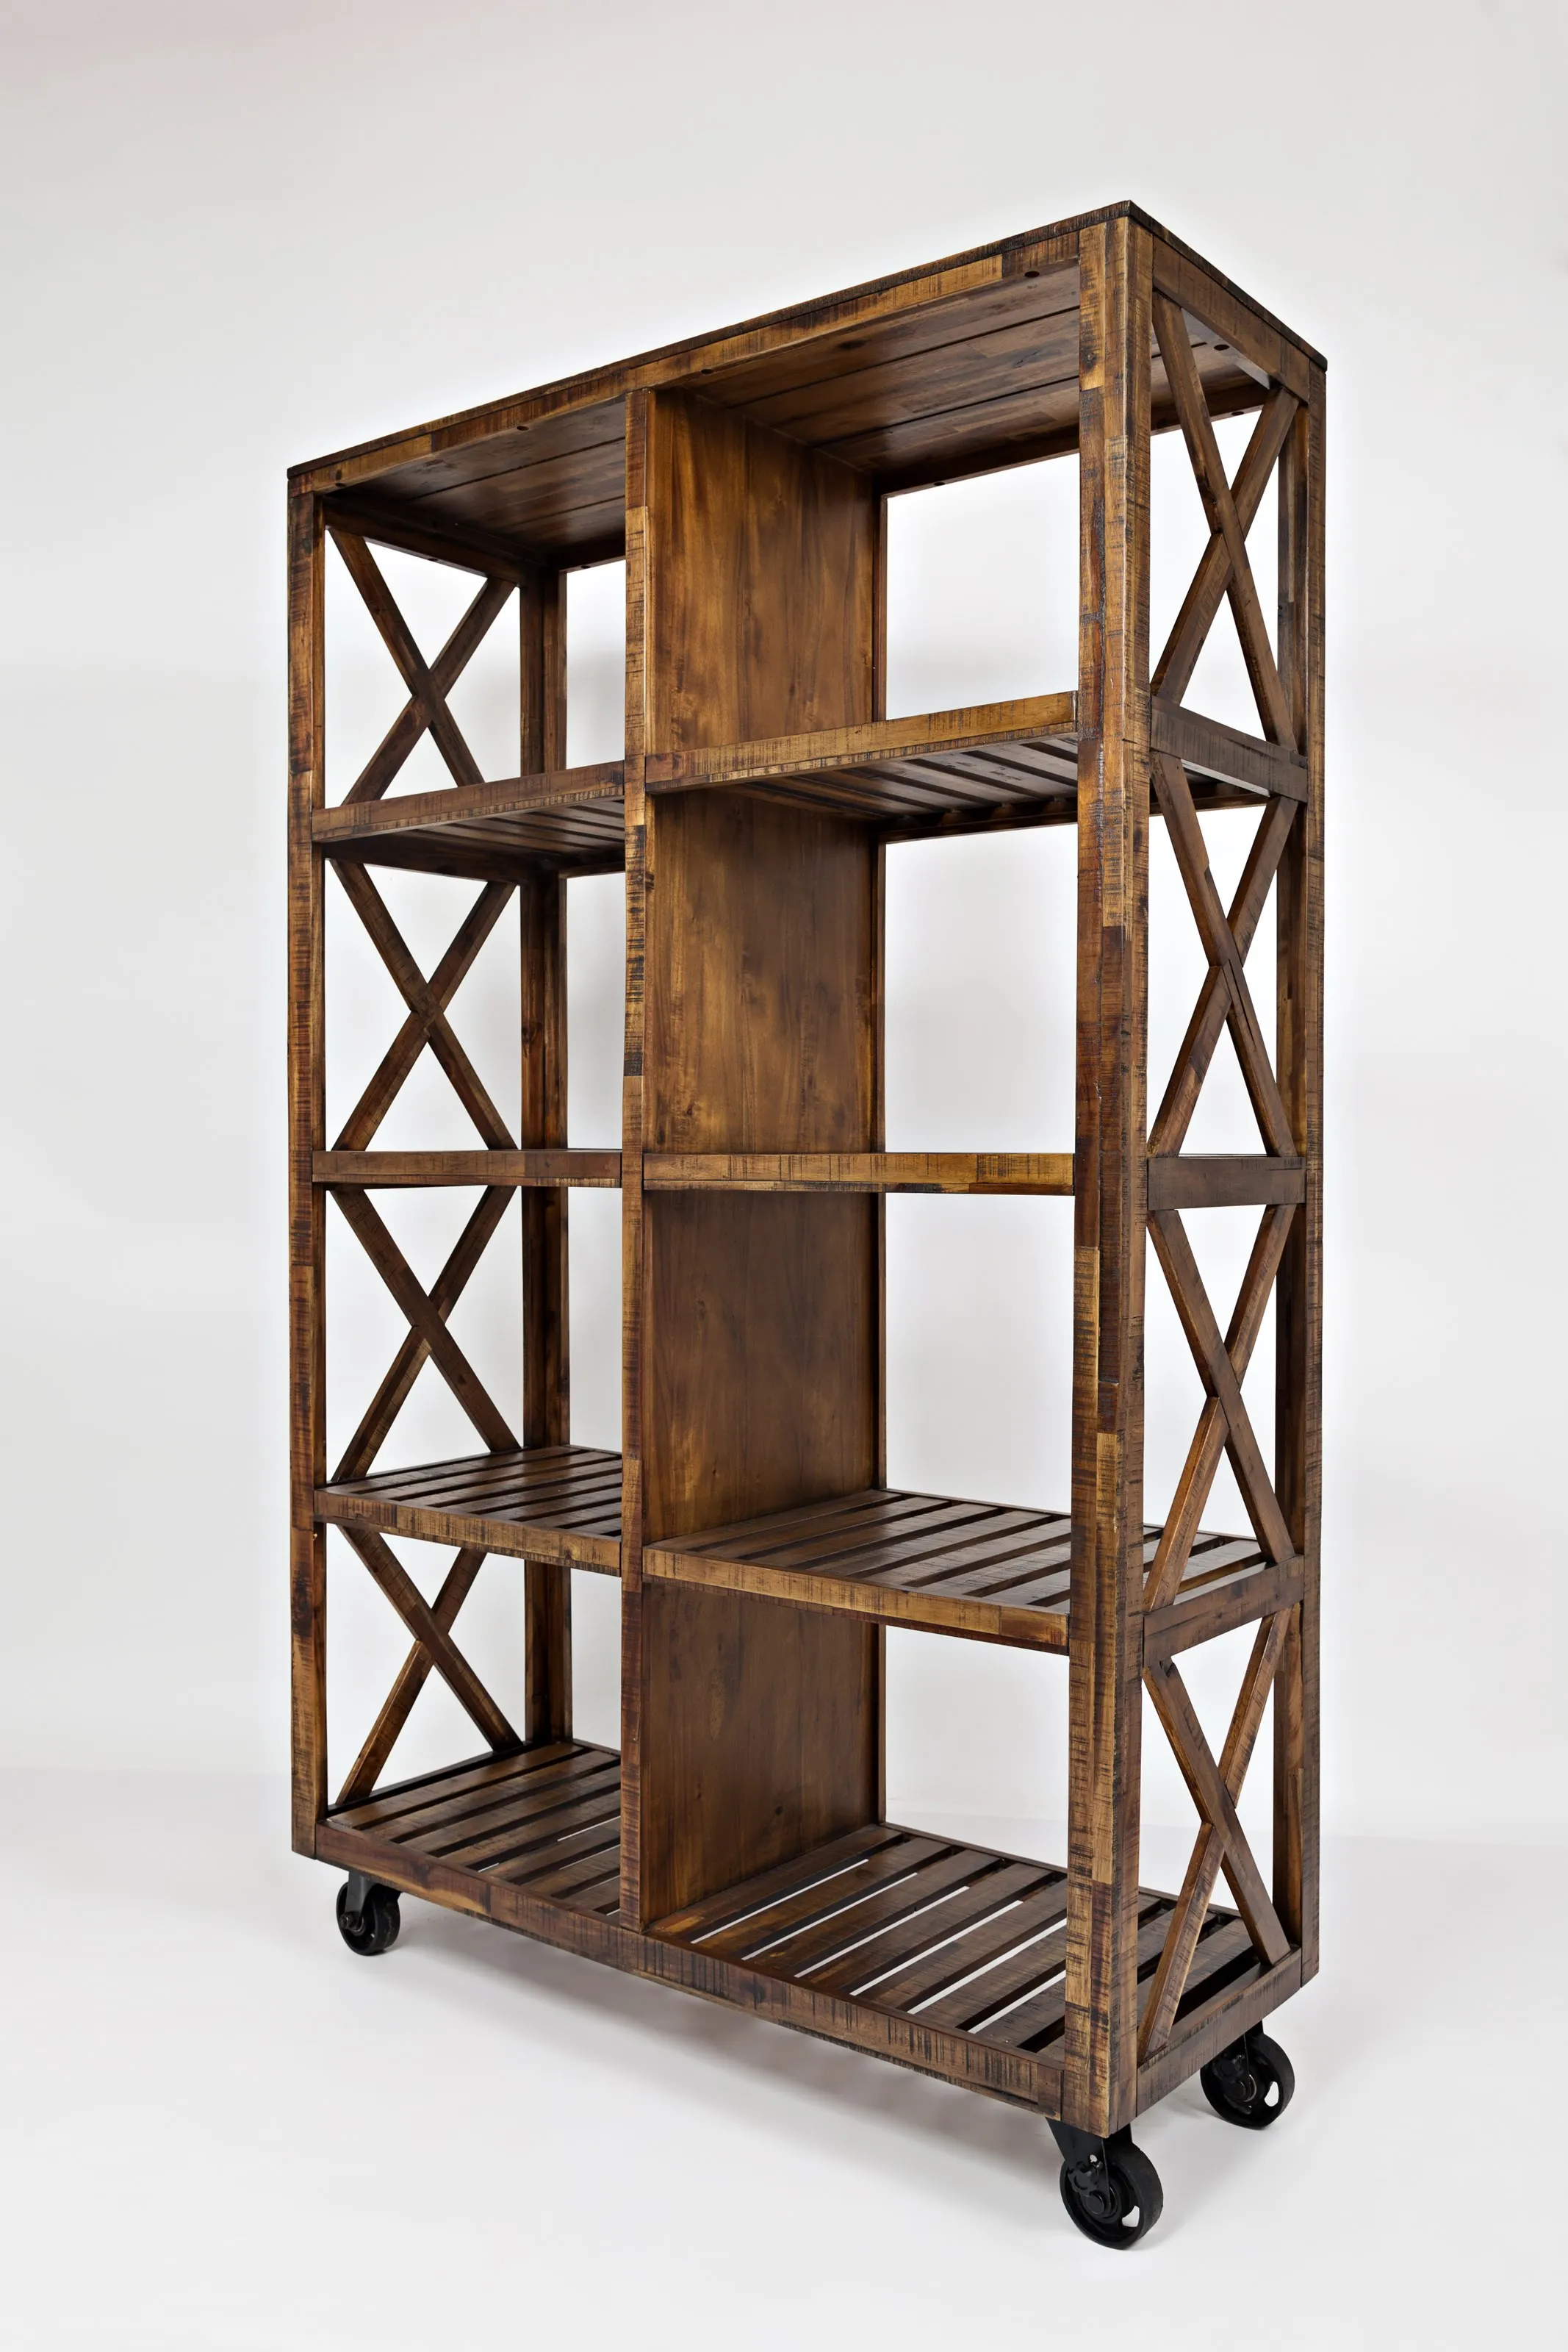 
4 Tier Bookcases and Book Shelves Industrial Vintage Metal and Wood Bookcases Furniture Wrought Iron Bookcase 